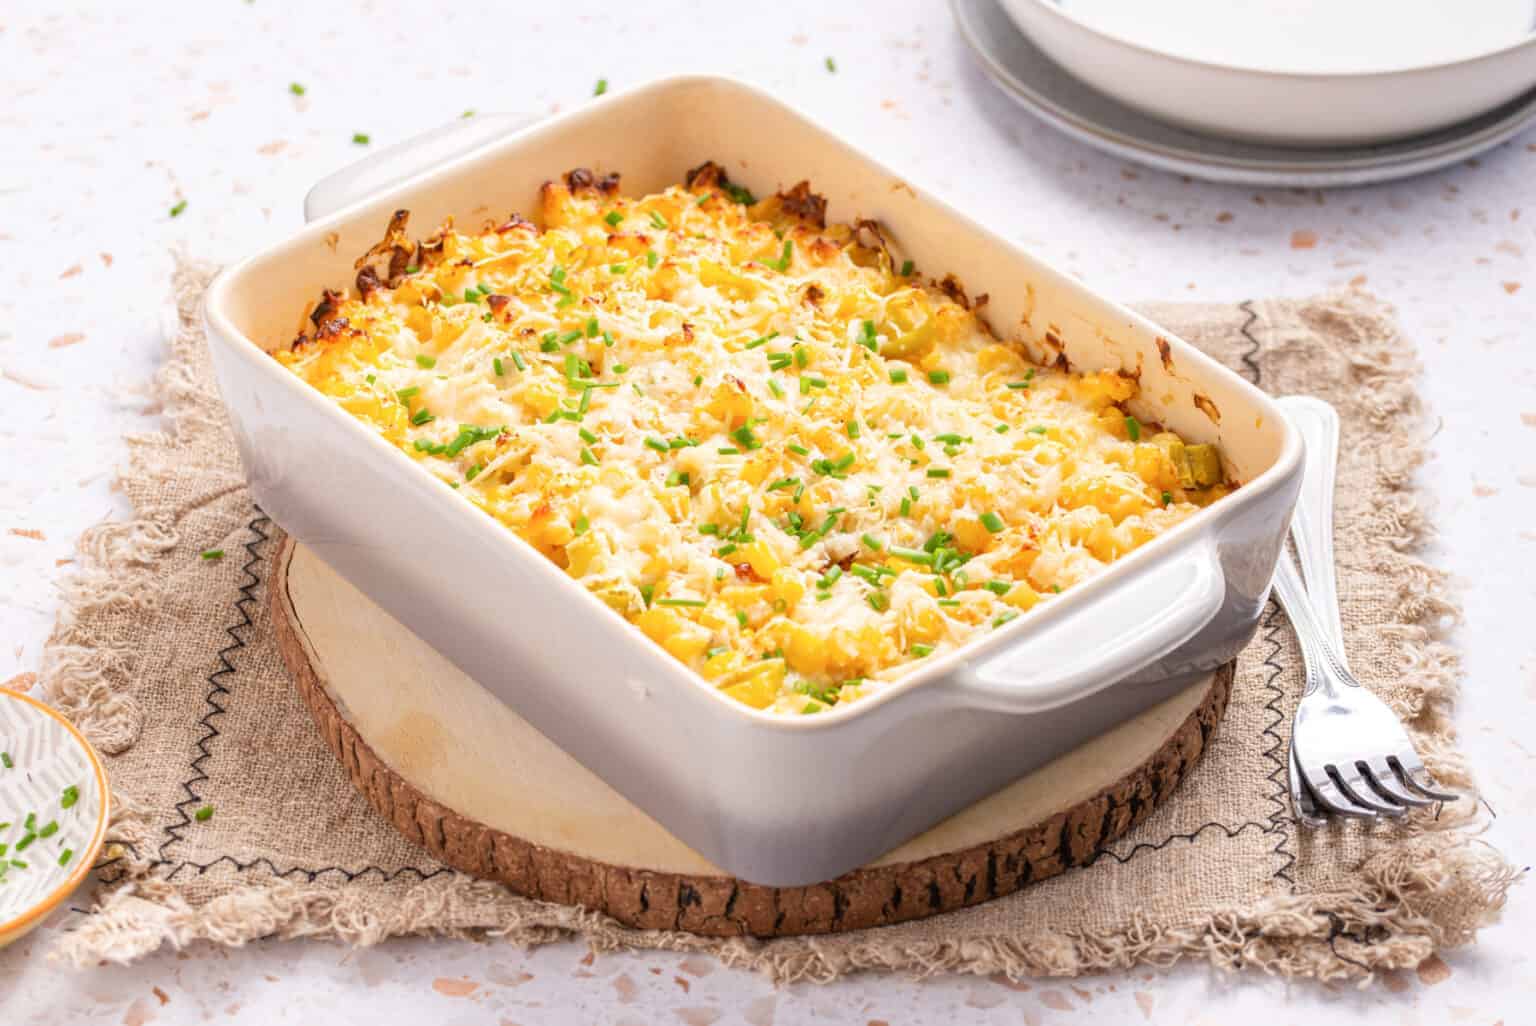 An image of corn casserole with cream cheese, ready to be served.